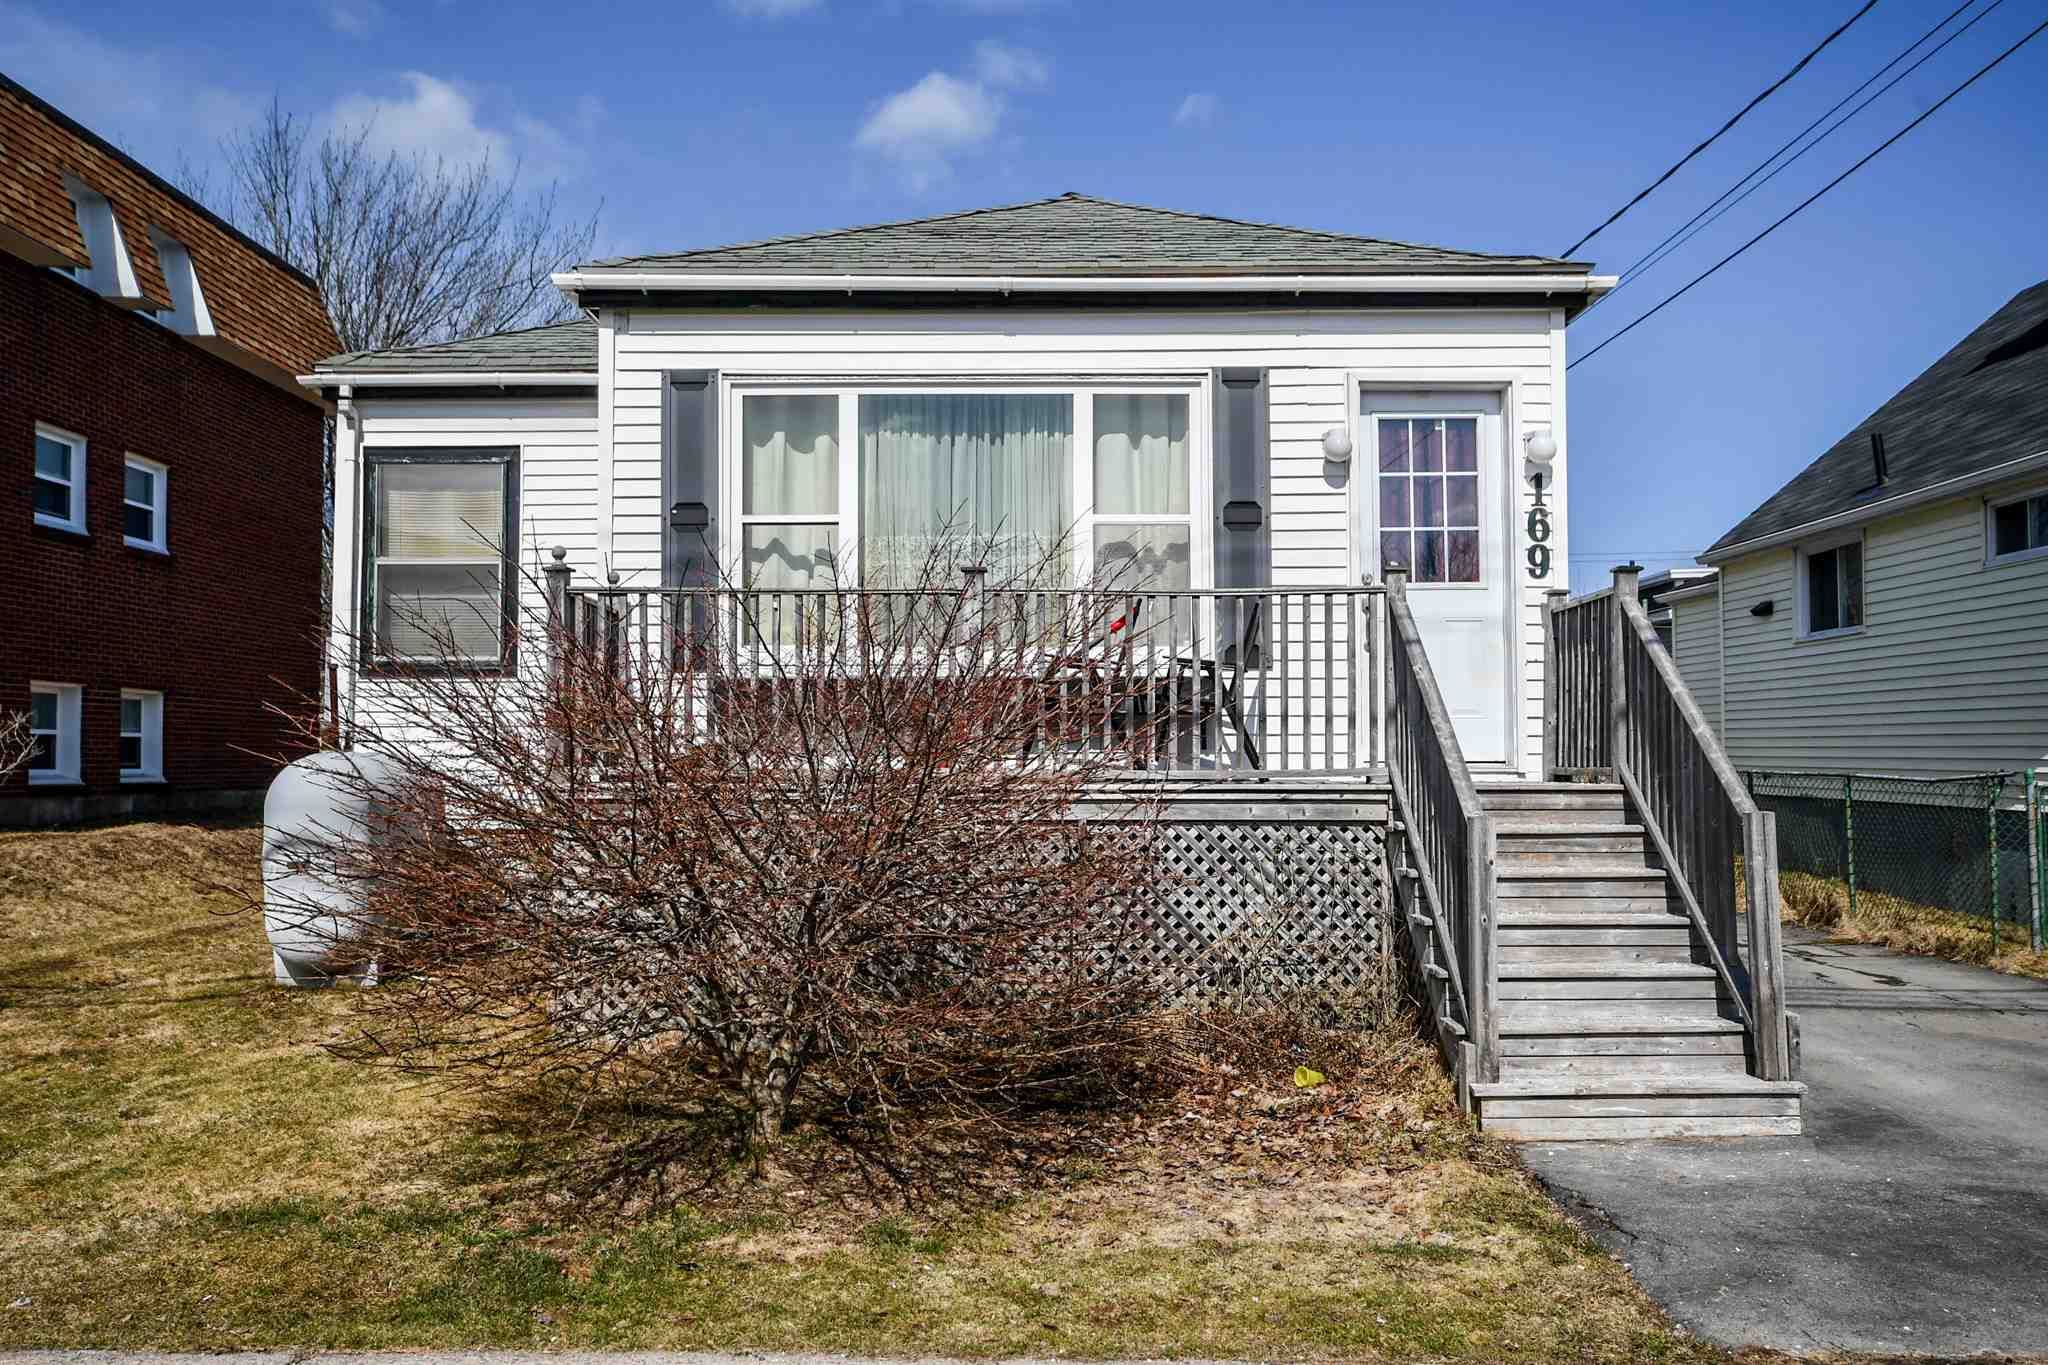 Main Photo: 169 Main Avenue in Fairview: 6-Fairview Residential for sale (Halifax-Dartmouth)  : MLS®# 202105999